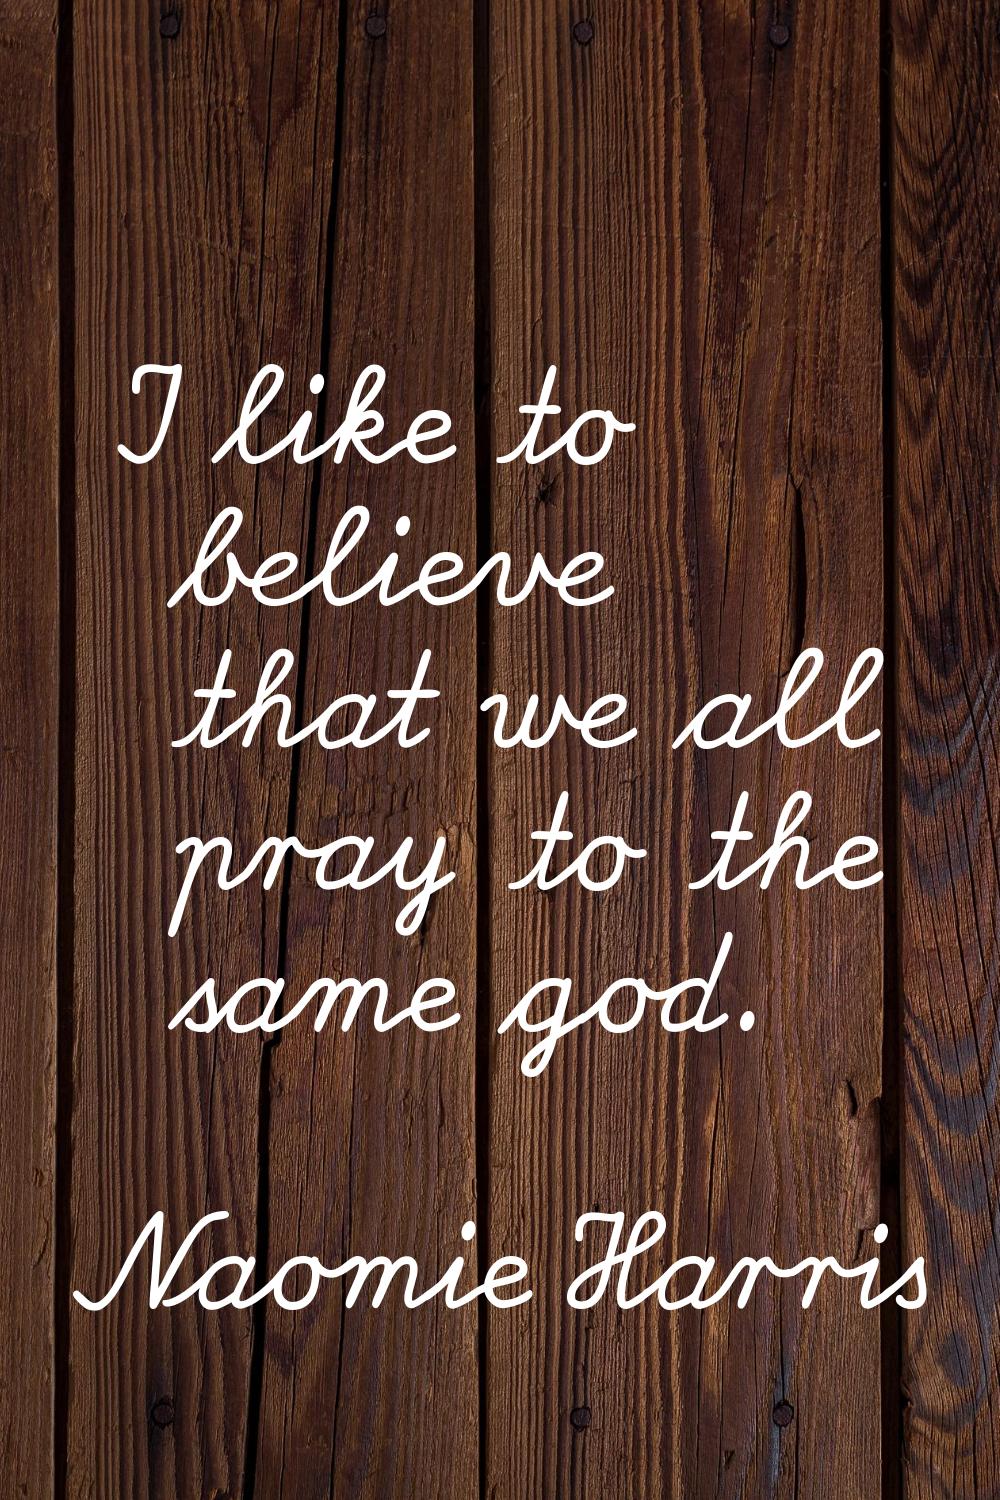 I like to believe that we all pray to the same god.